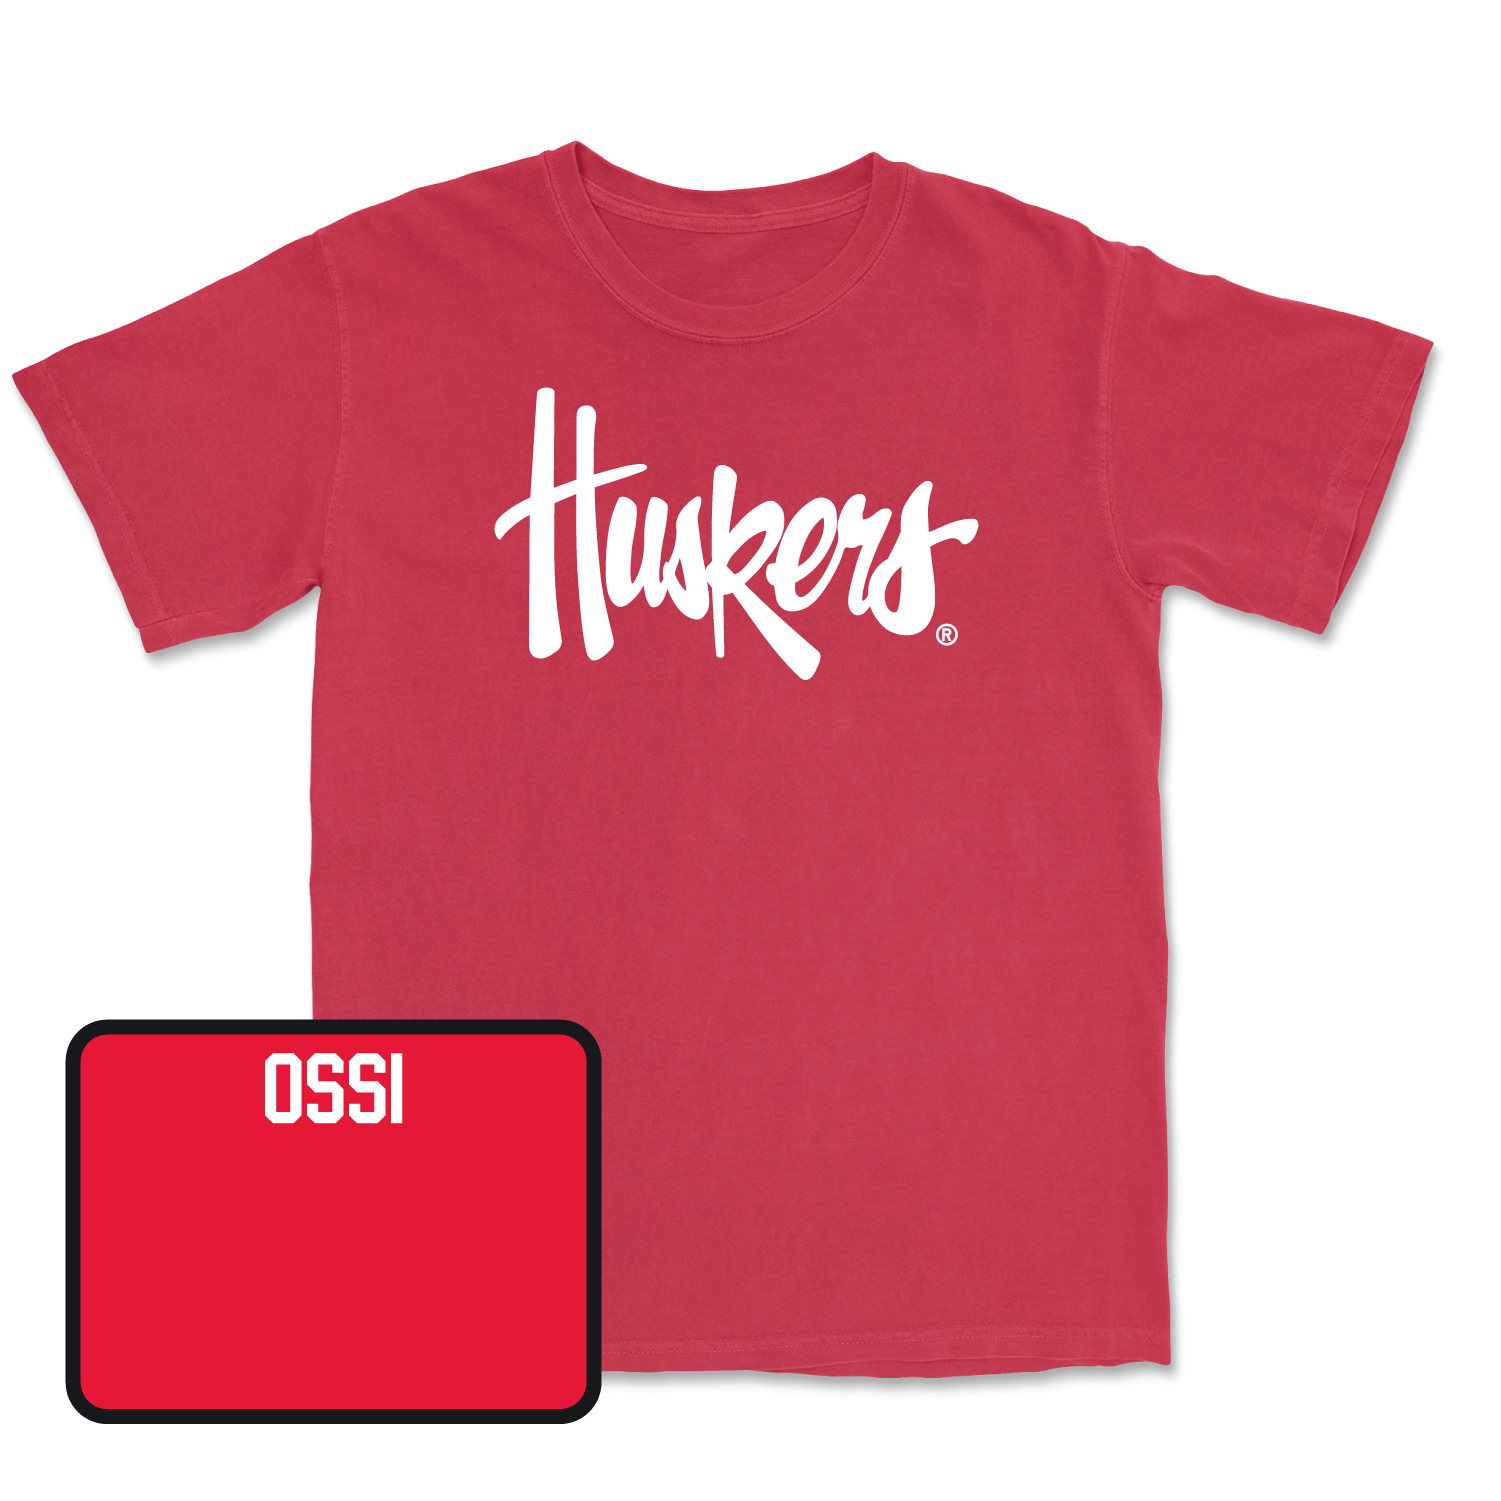 Red Women's Rifle Huskers Tee Small / Cecelia Ossi